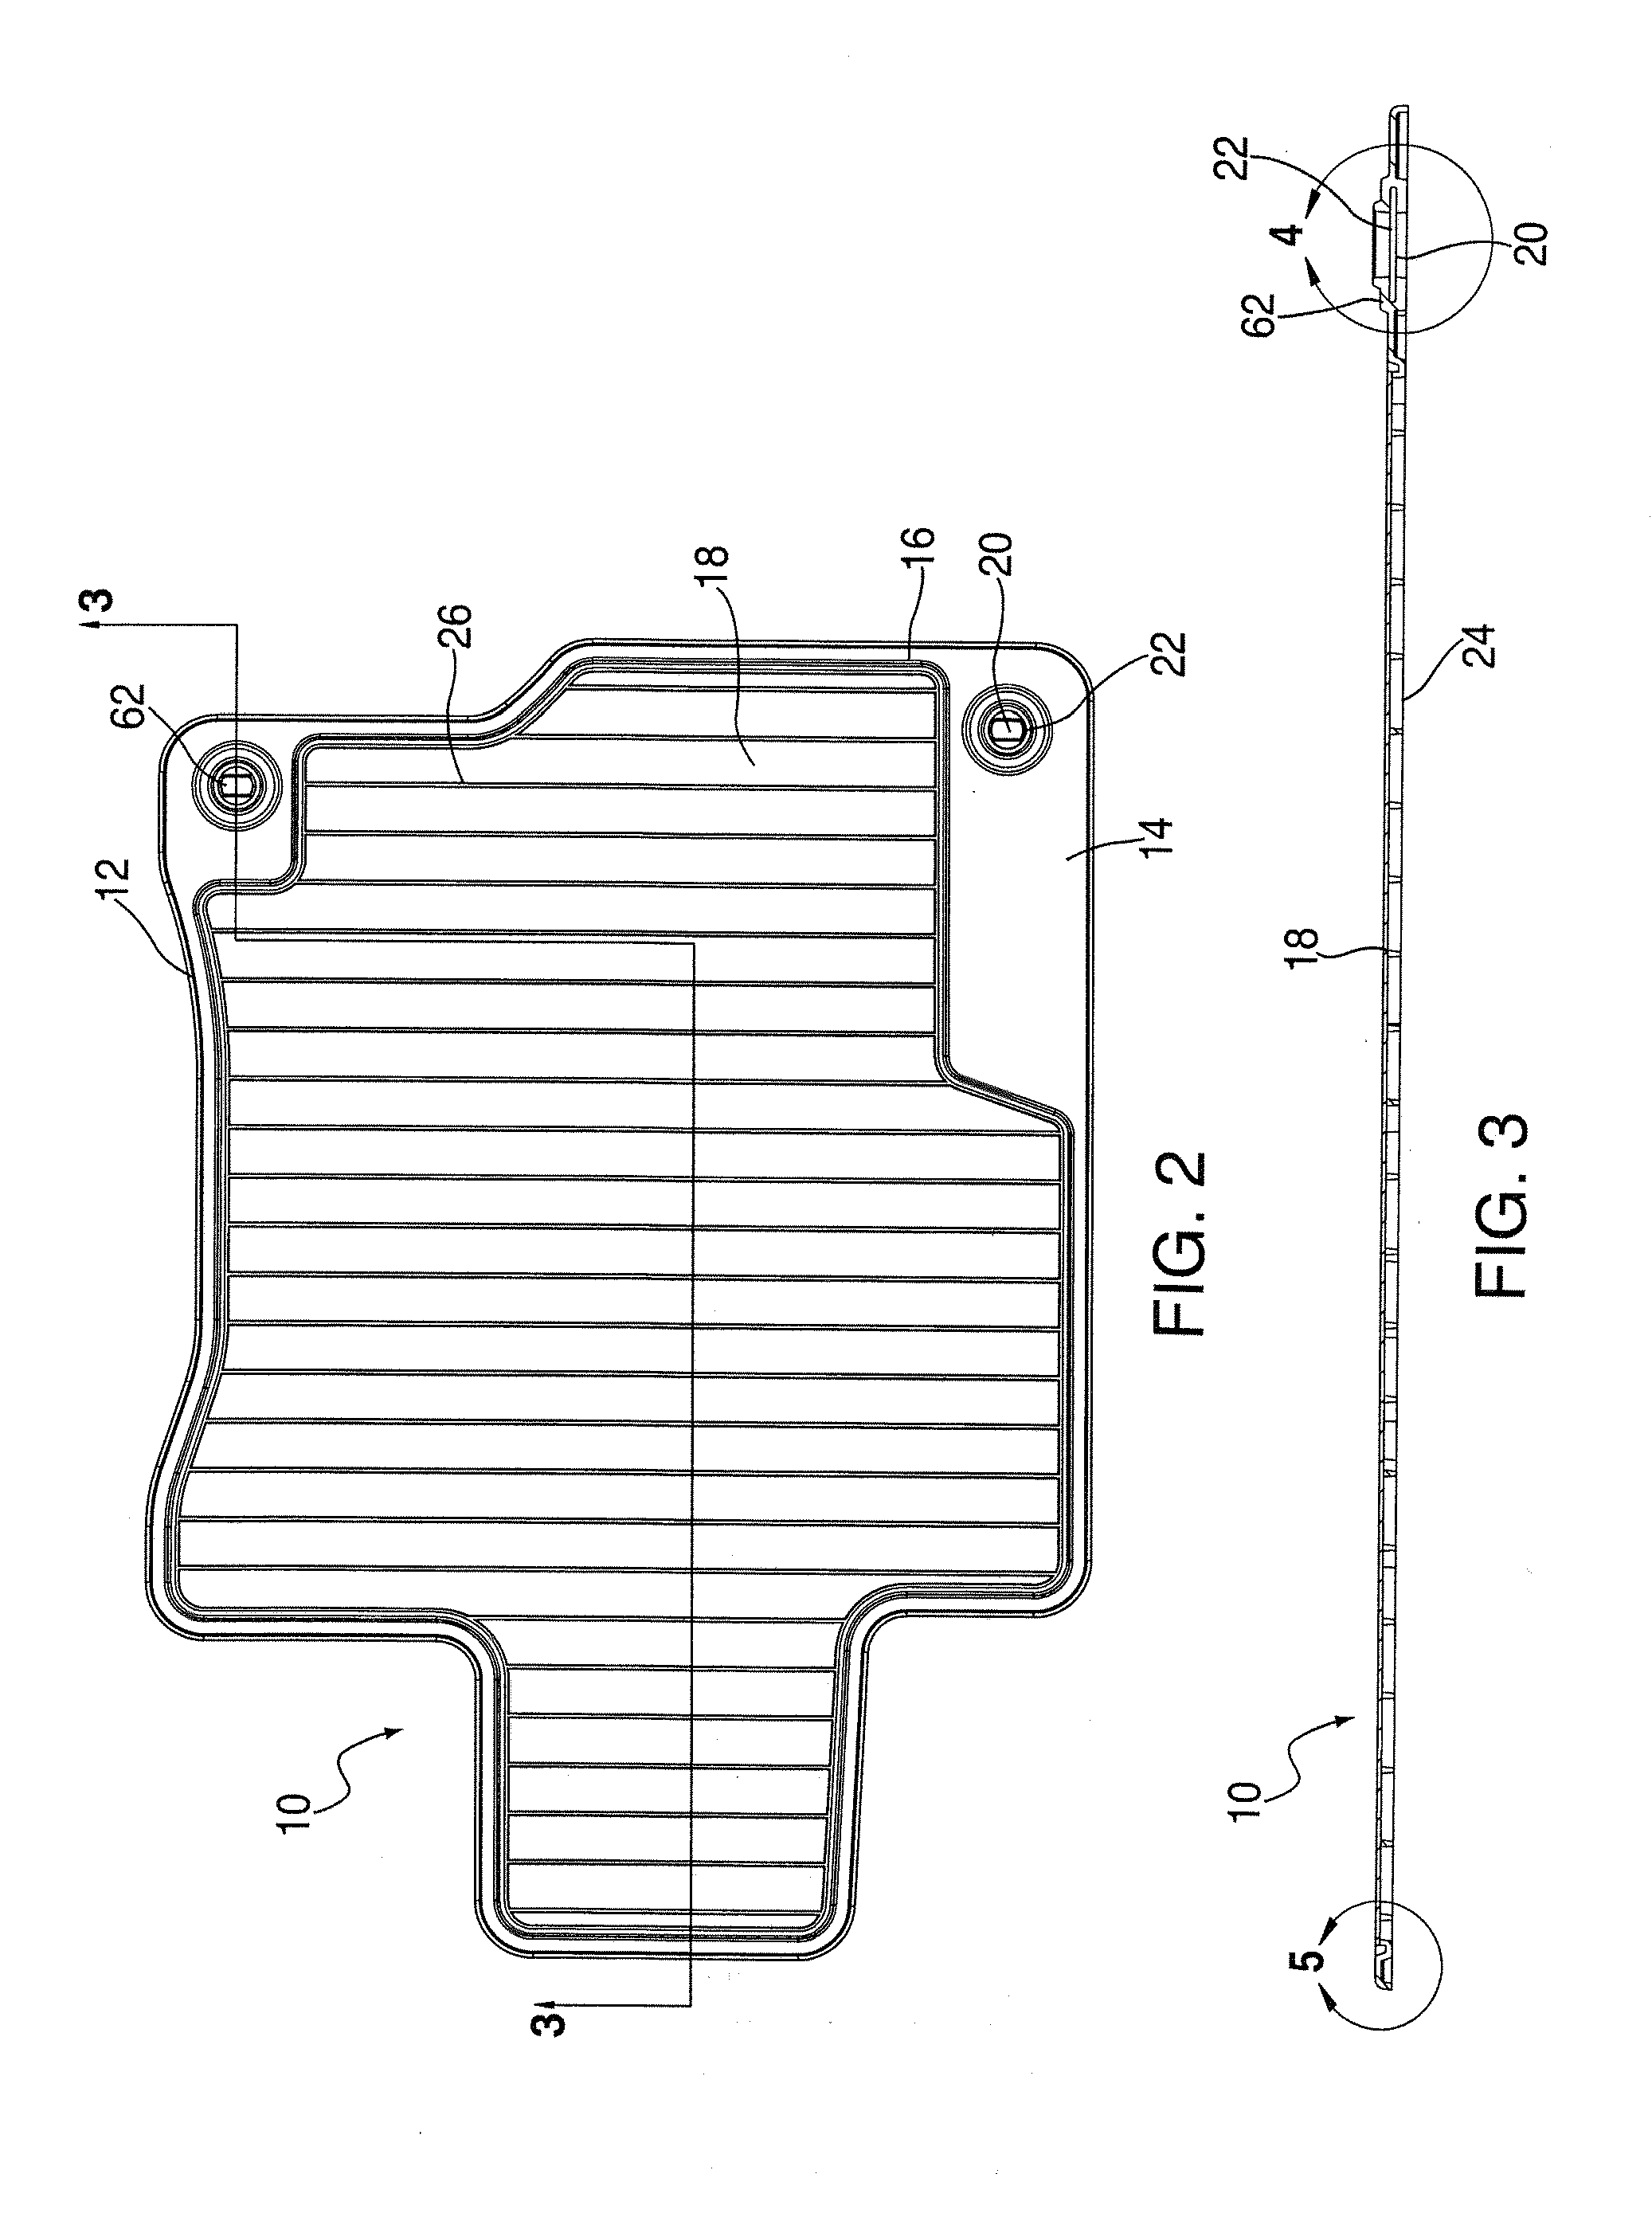 Carpet floor mat having plastic migrating prevention formation, and associated injection mold